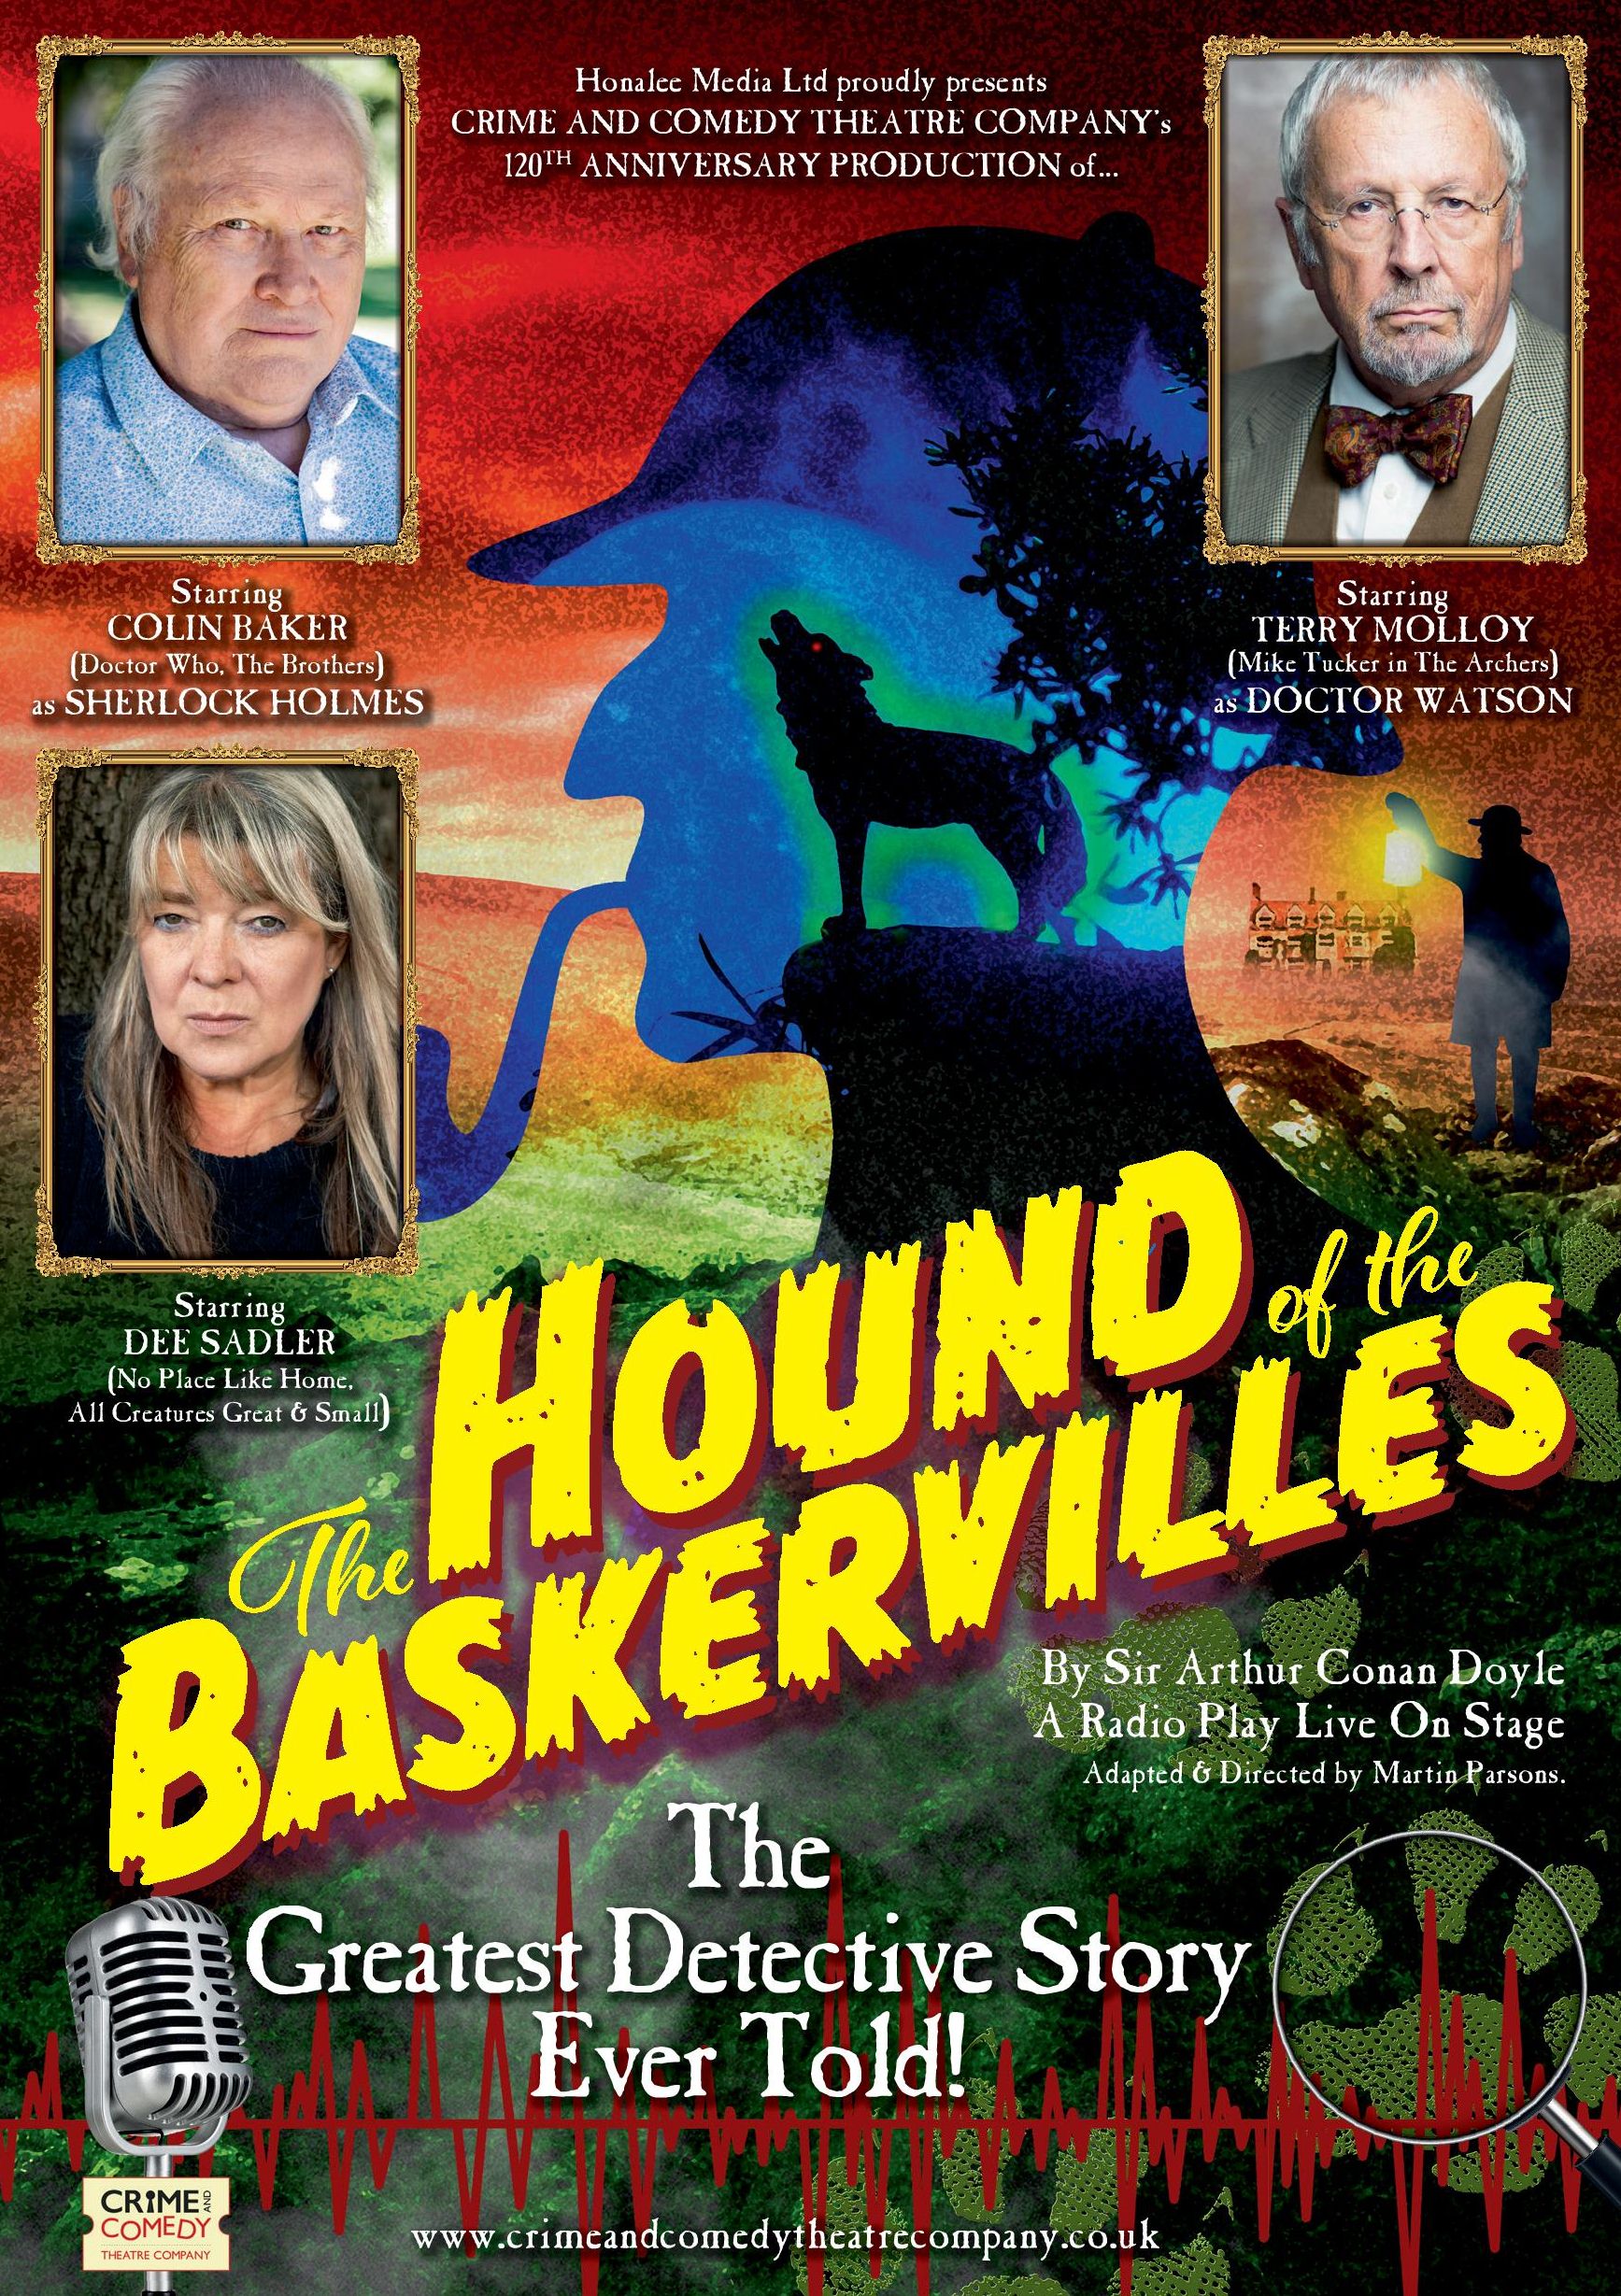 Hound of the Baskervilles - a radio play live on stage A5